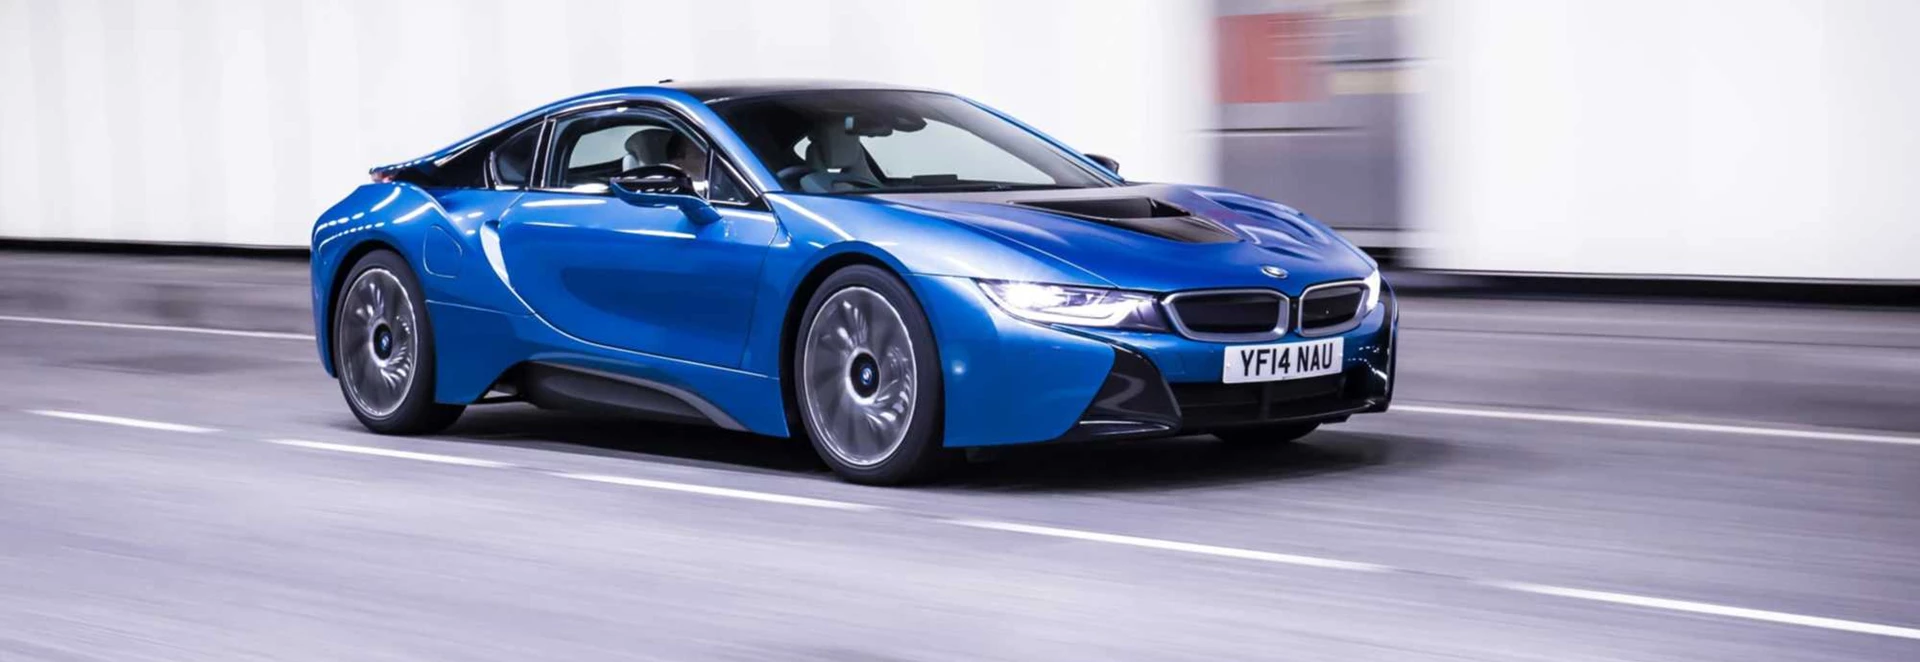 BMW i8 coupe review 